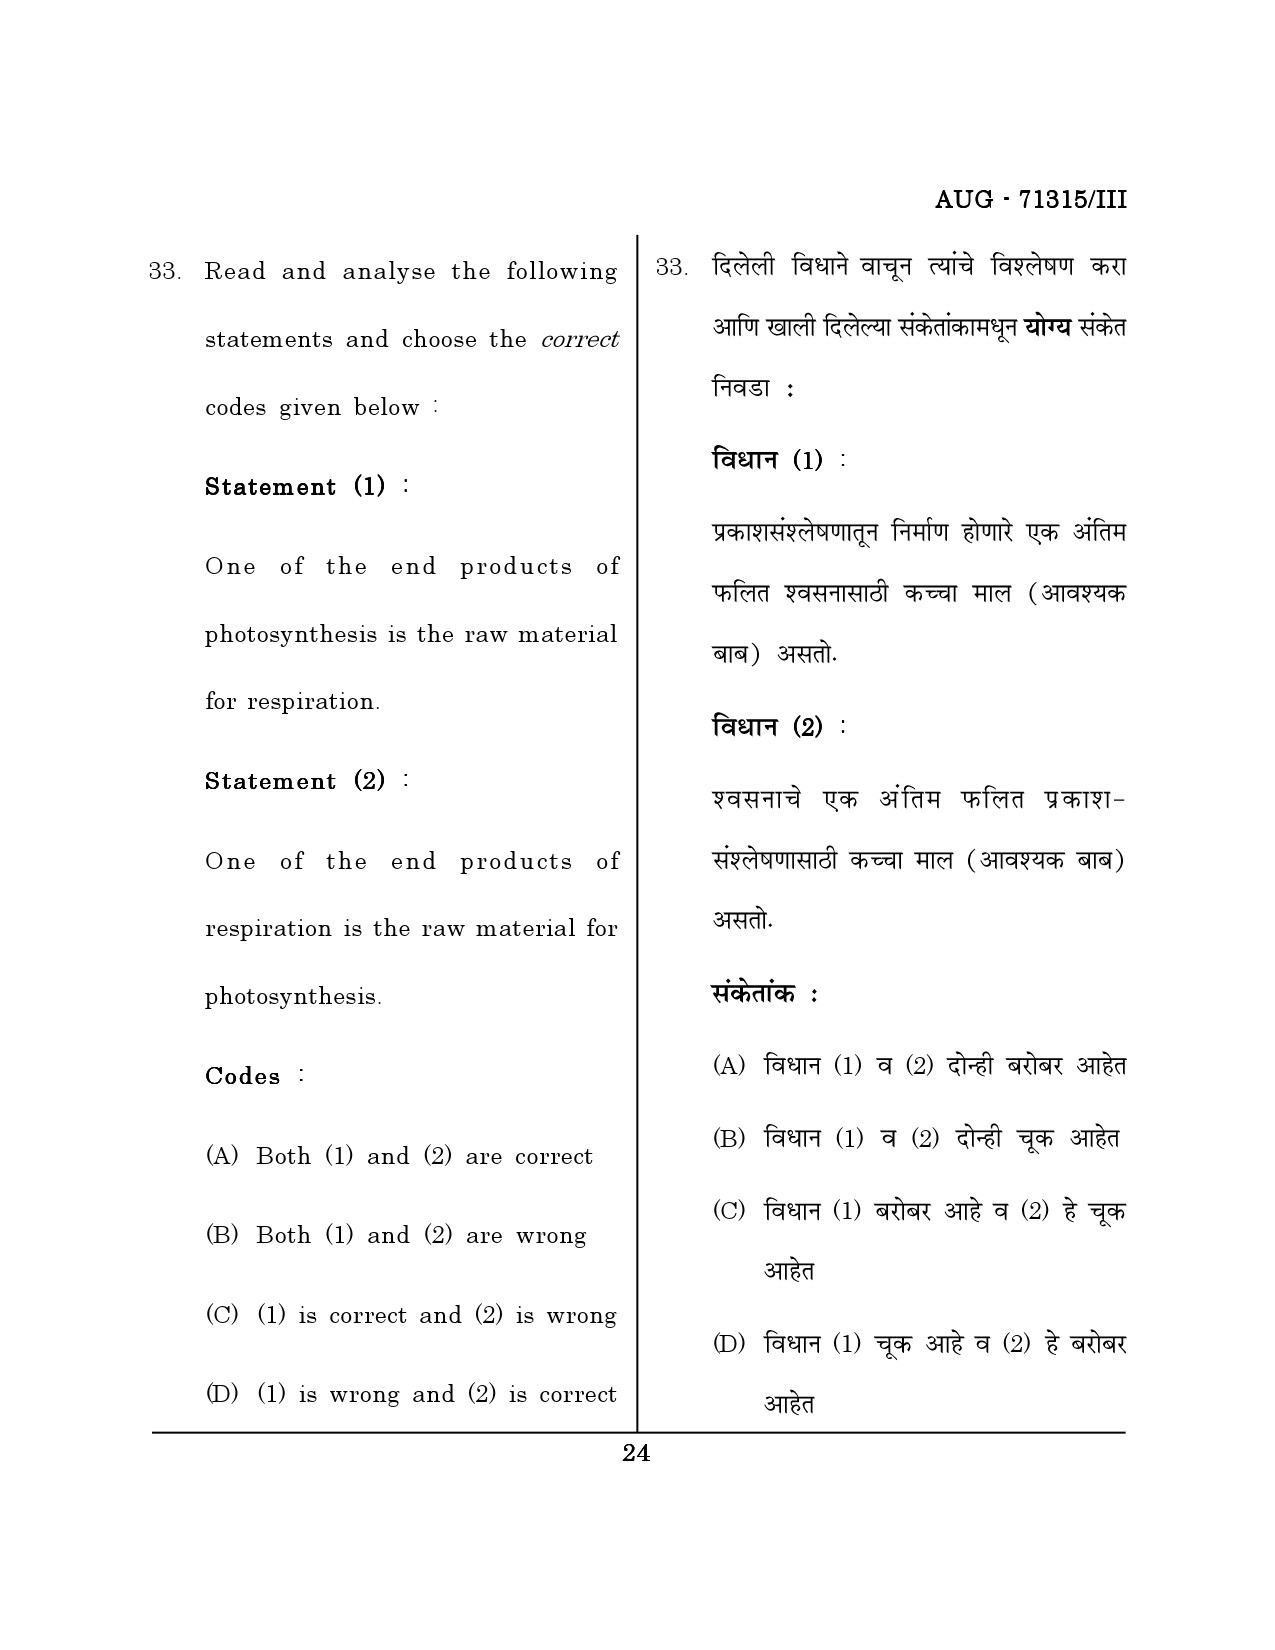 Maharashtra SET Physical Education Question Paper III August 2015 23